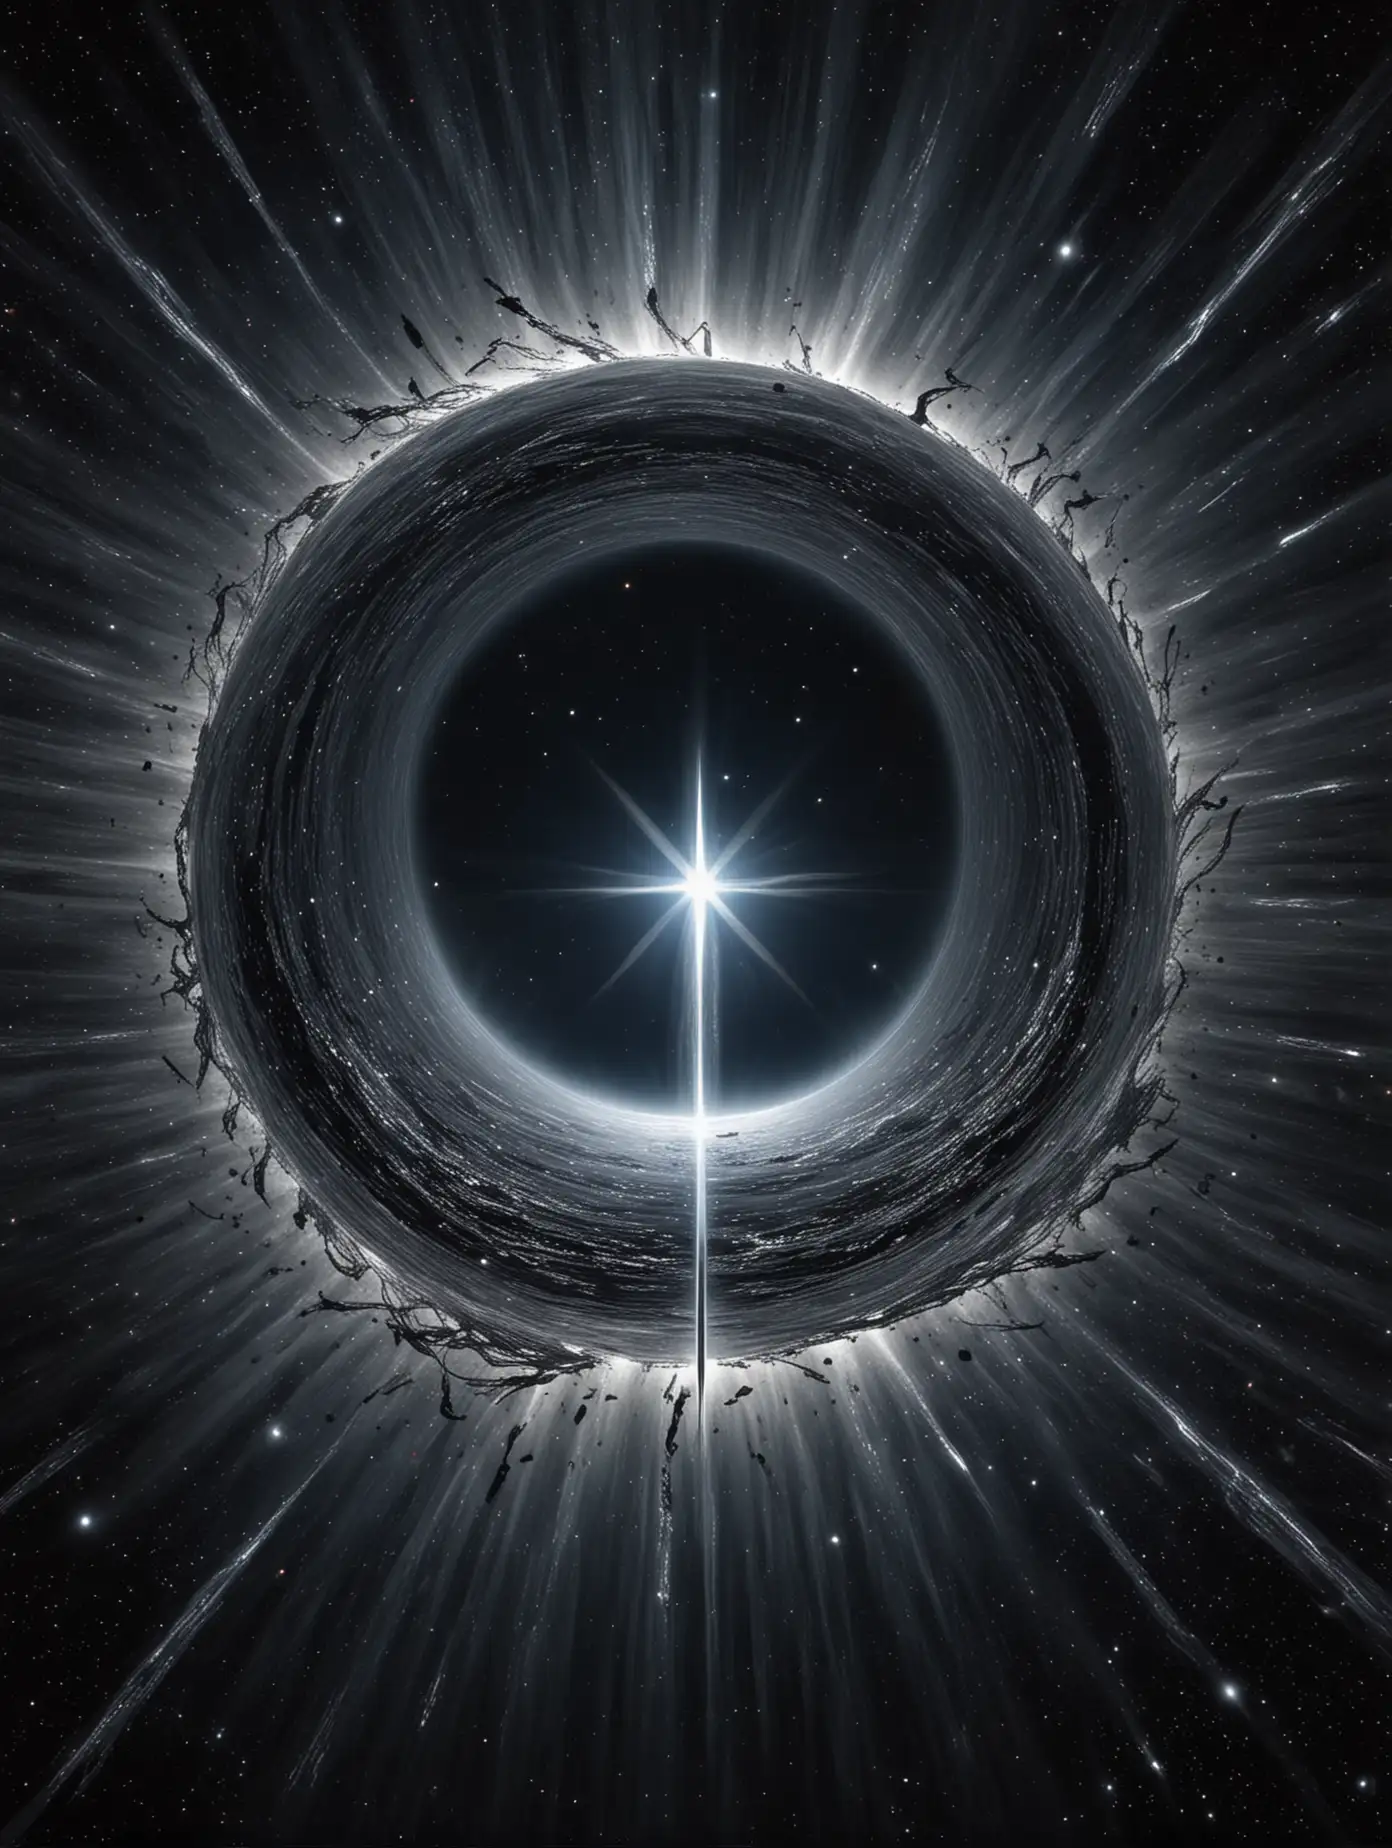 Cosmic-Black-Hole-with-Silver-Sword-at-Event-Horizon